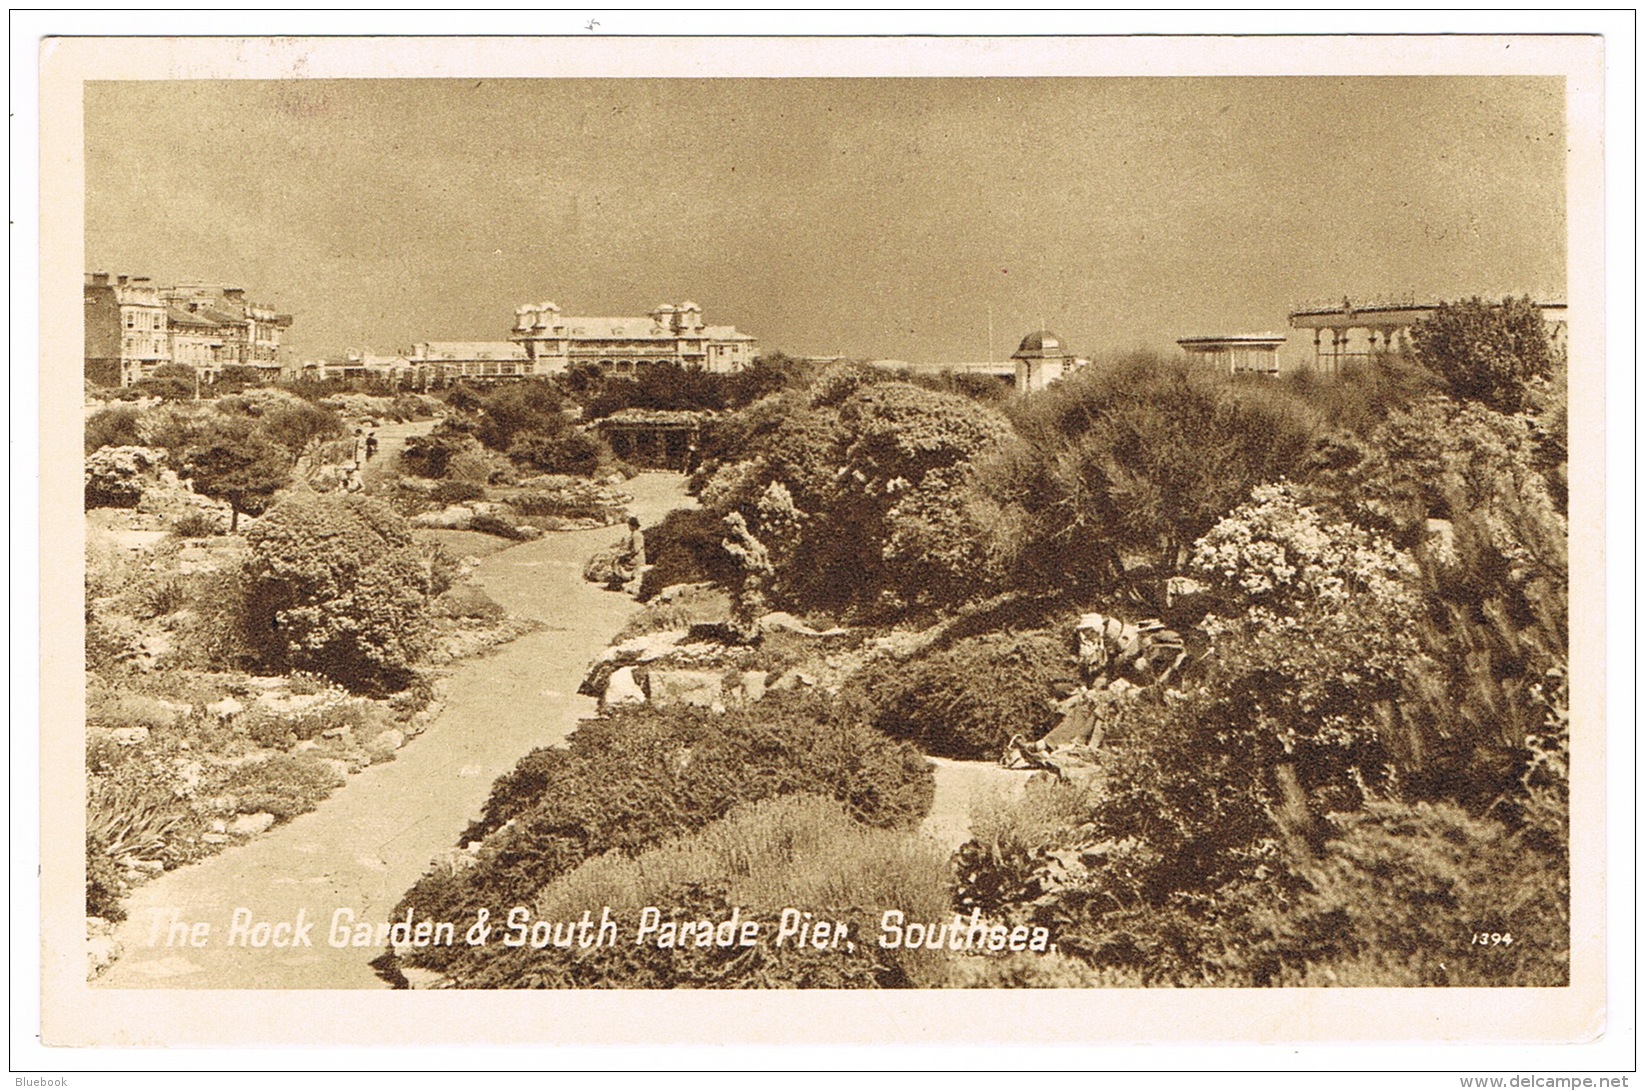 RB 1102 - Postcard - The Rock Garden &amp; South Parade Pier - Southsea Portsmouth Hampshire - Portsmouth